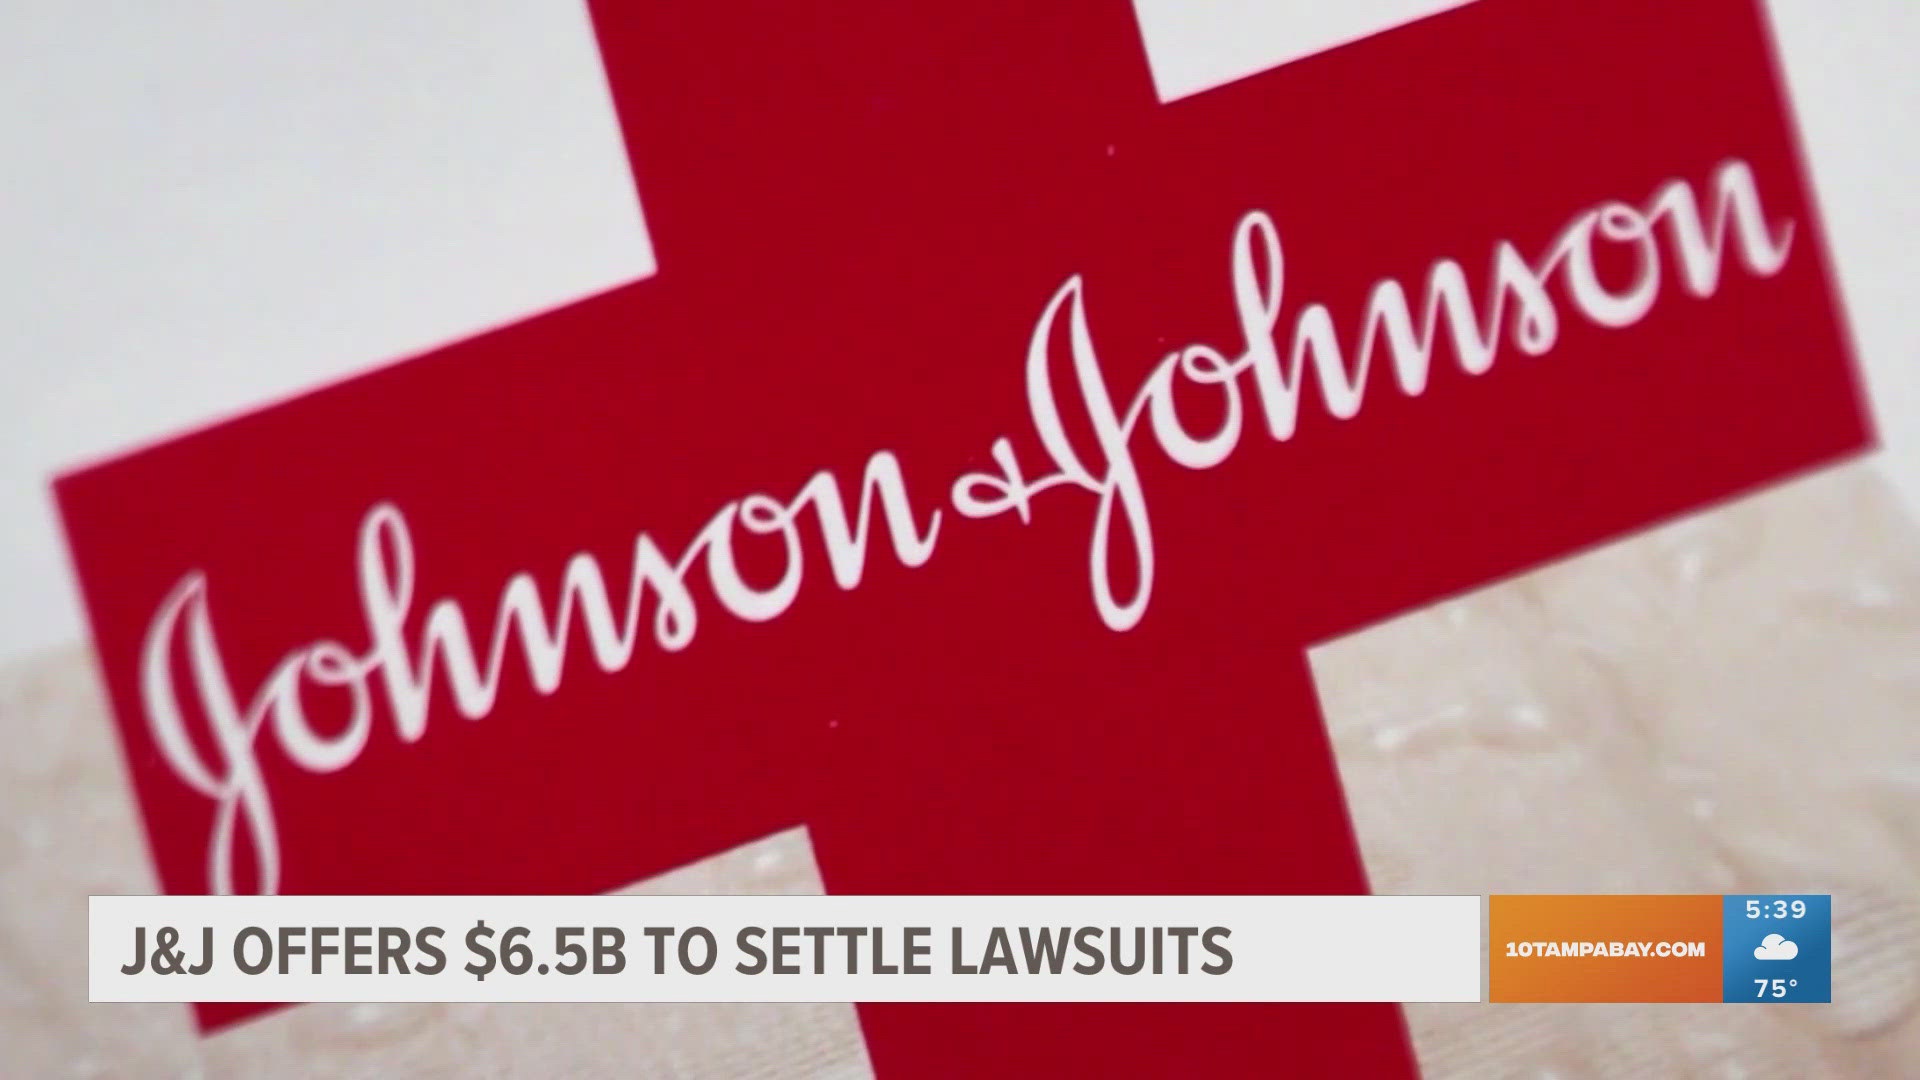 The company said it would pay $6.5 billion to settle legal claims, but it was shot down.